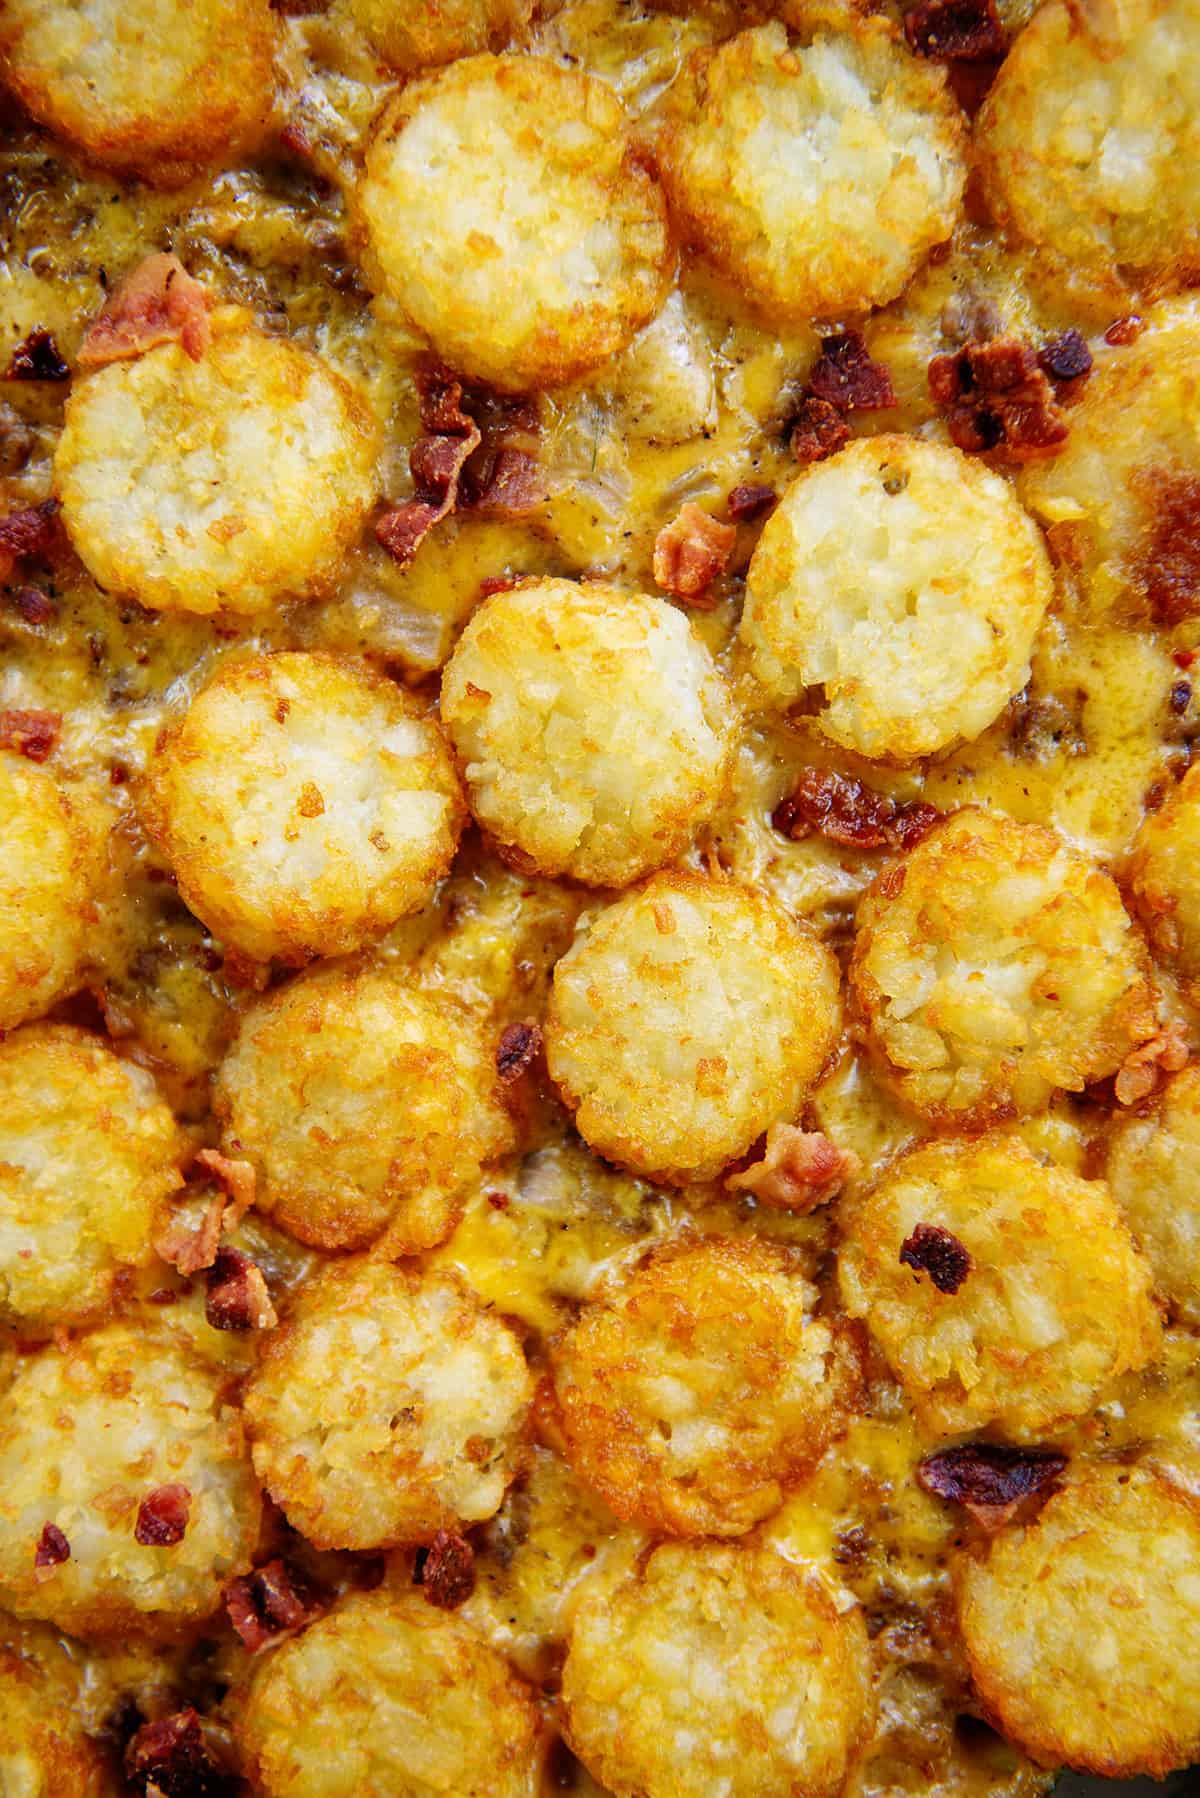 tots layered over cheesy beef.